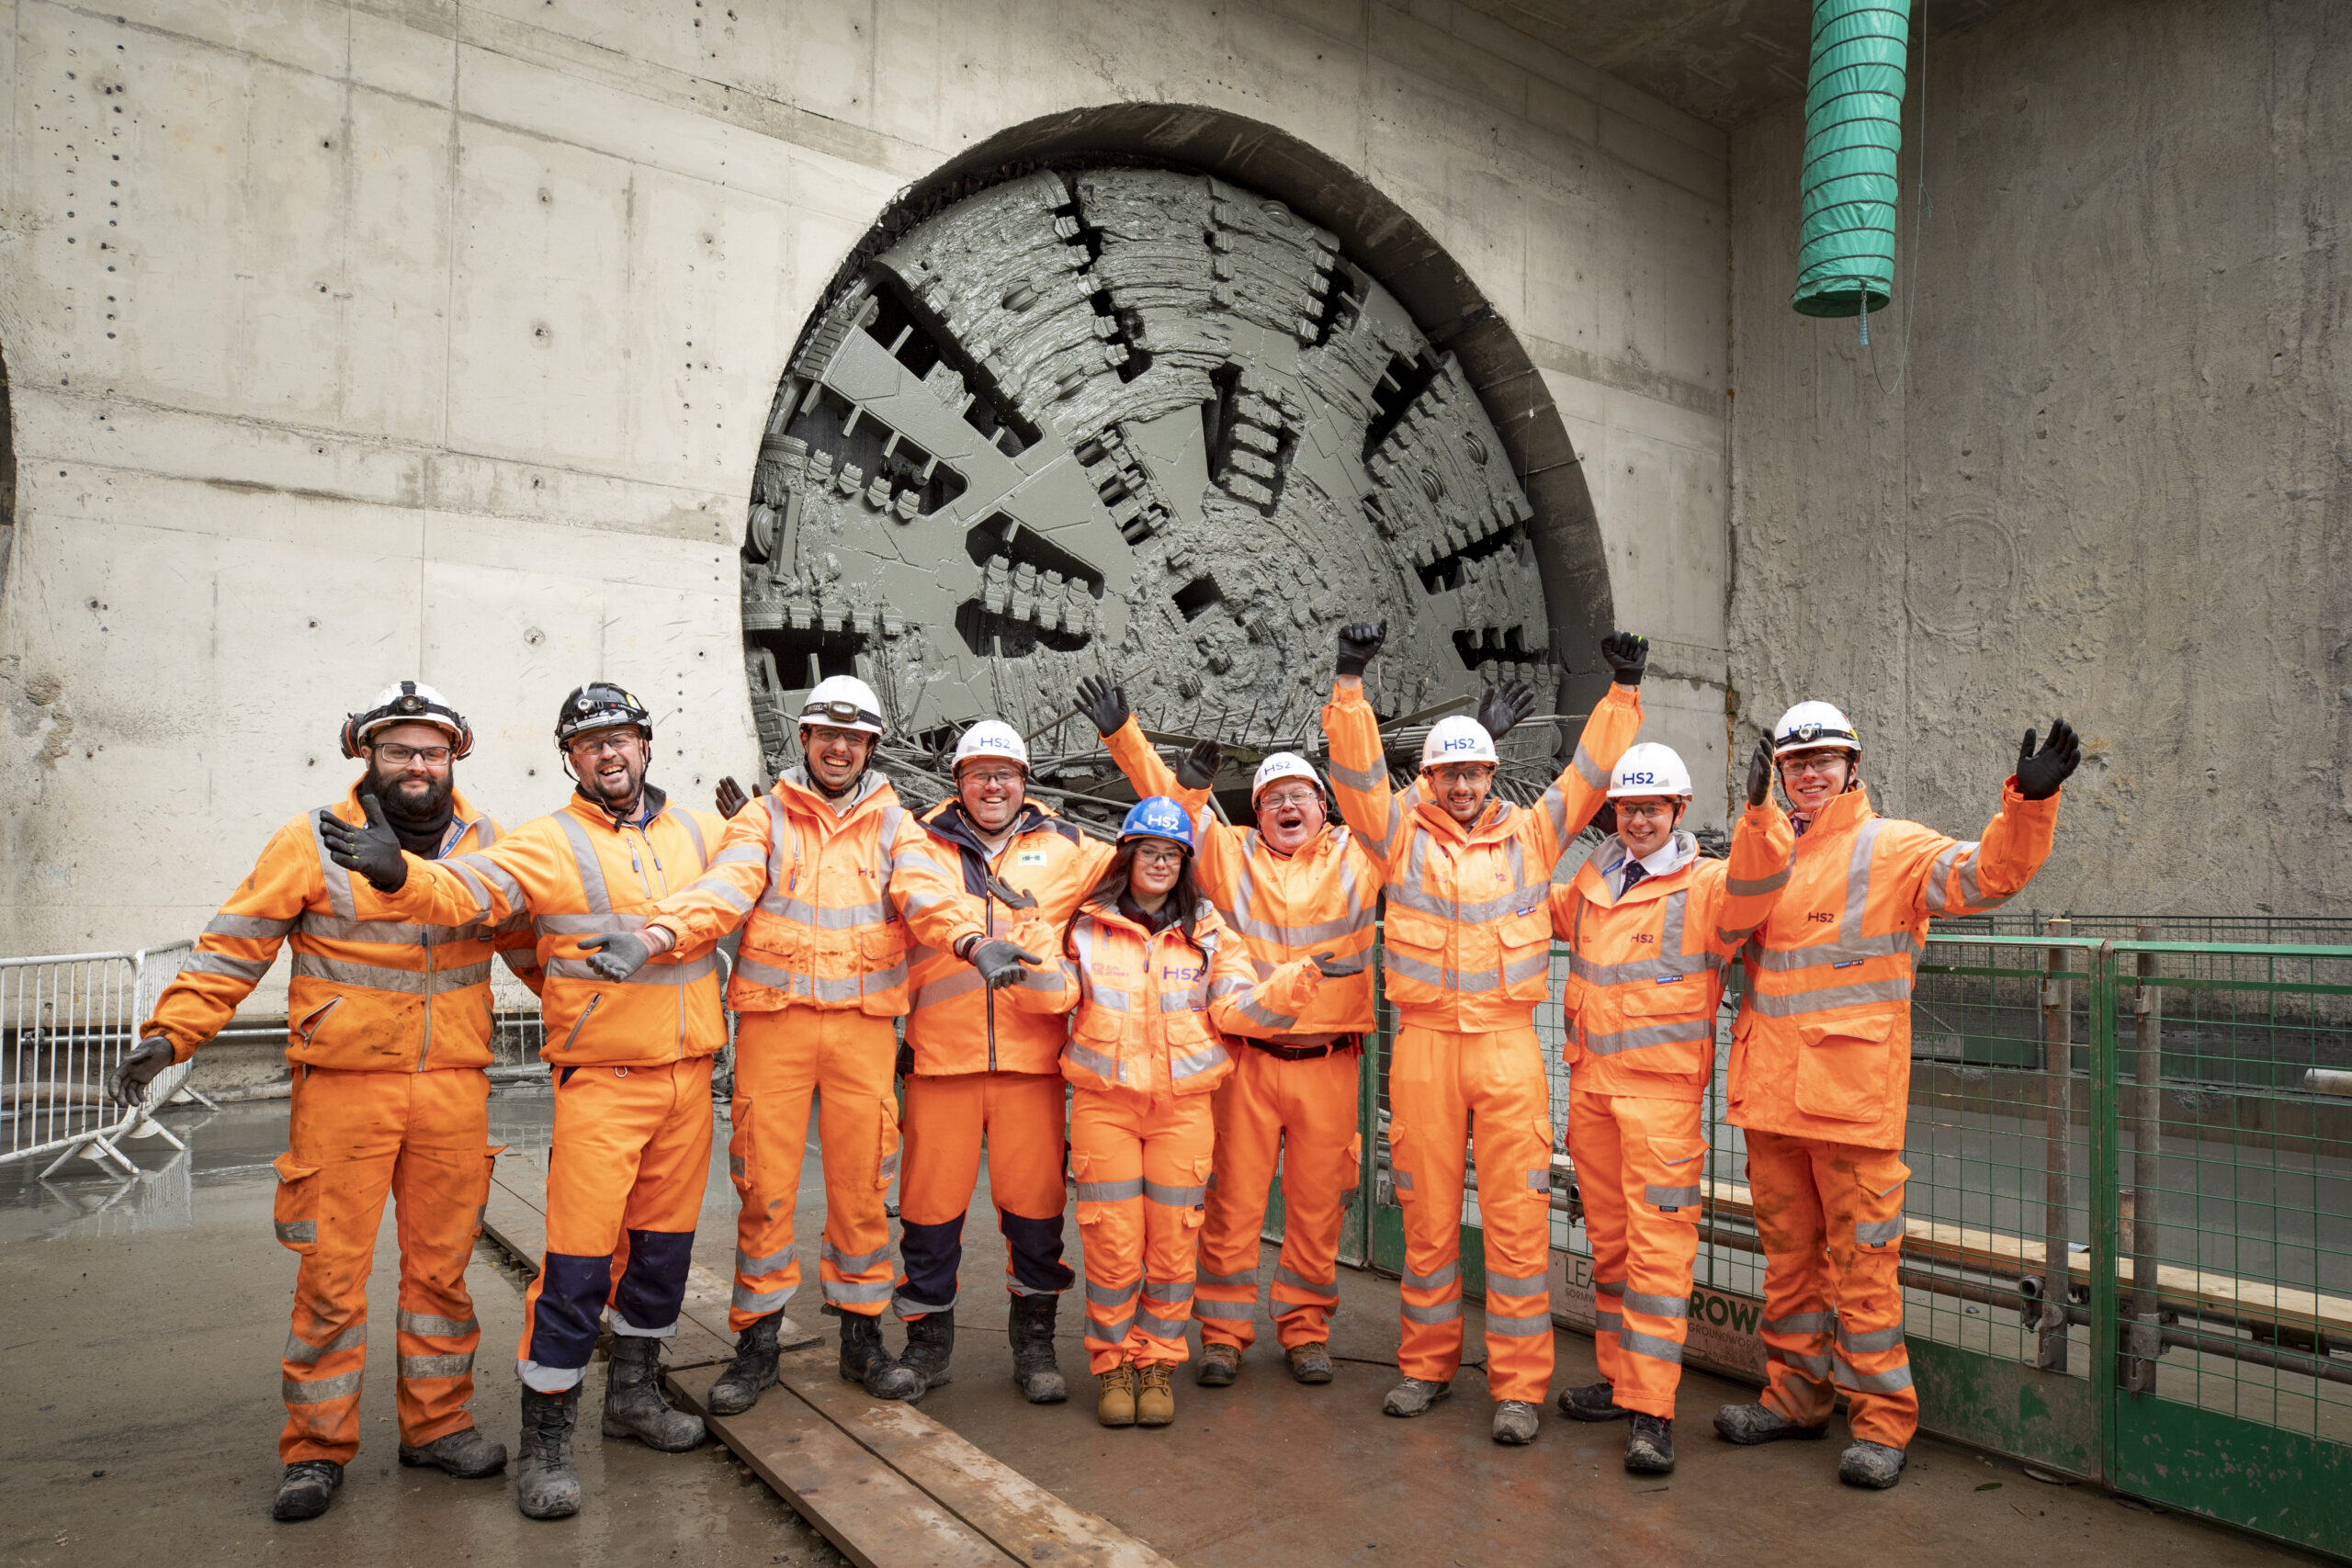 Tunnel boring machine Dorothy breaks through on the second bore of the Long Itchington Wood tunnel on the new HS2 high-speed railway